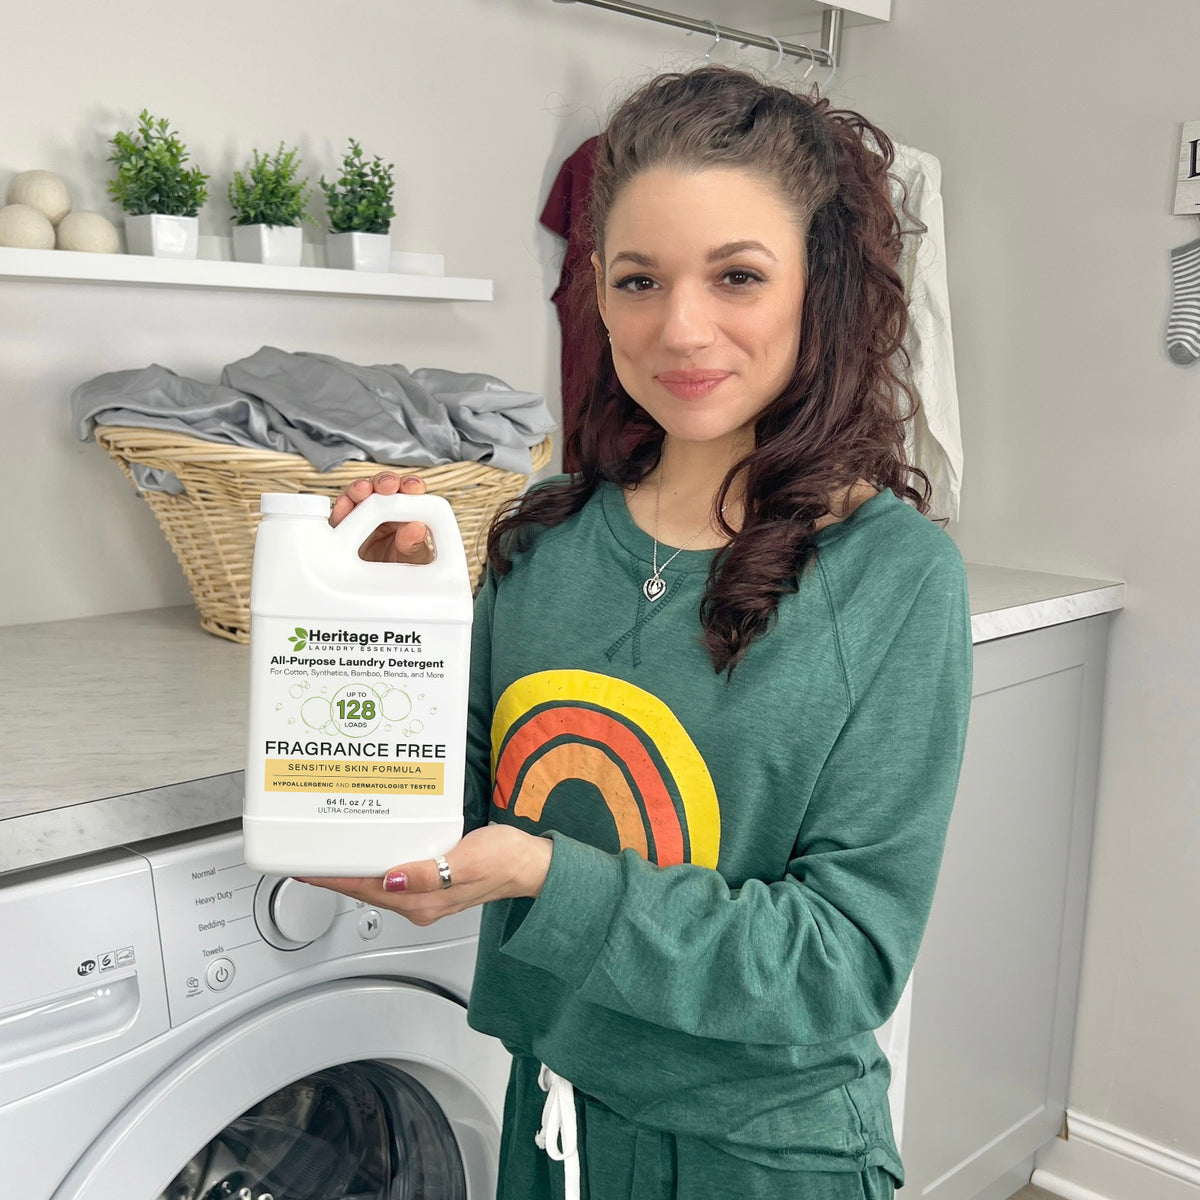 Comfort pure reviews in Laundry Care - ChickAdvisor